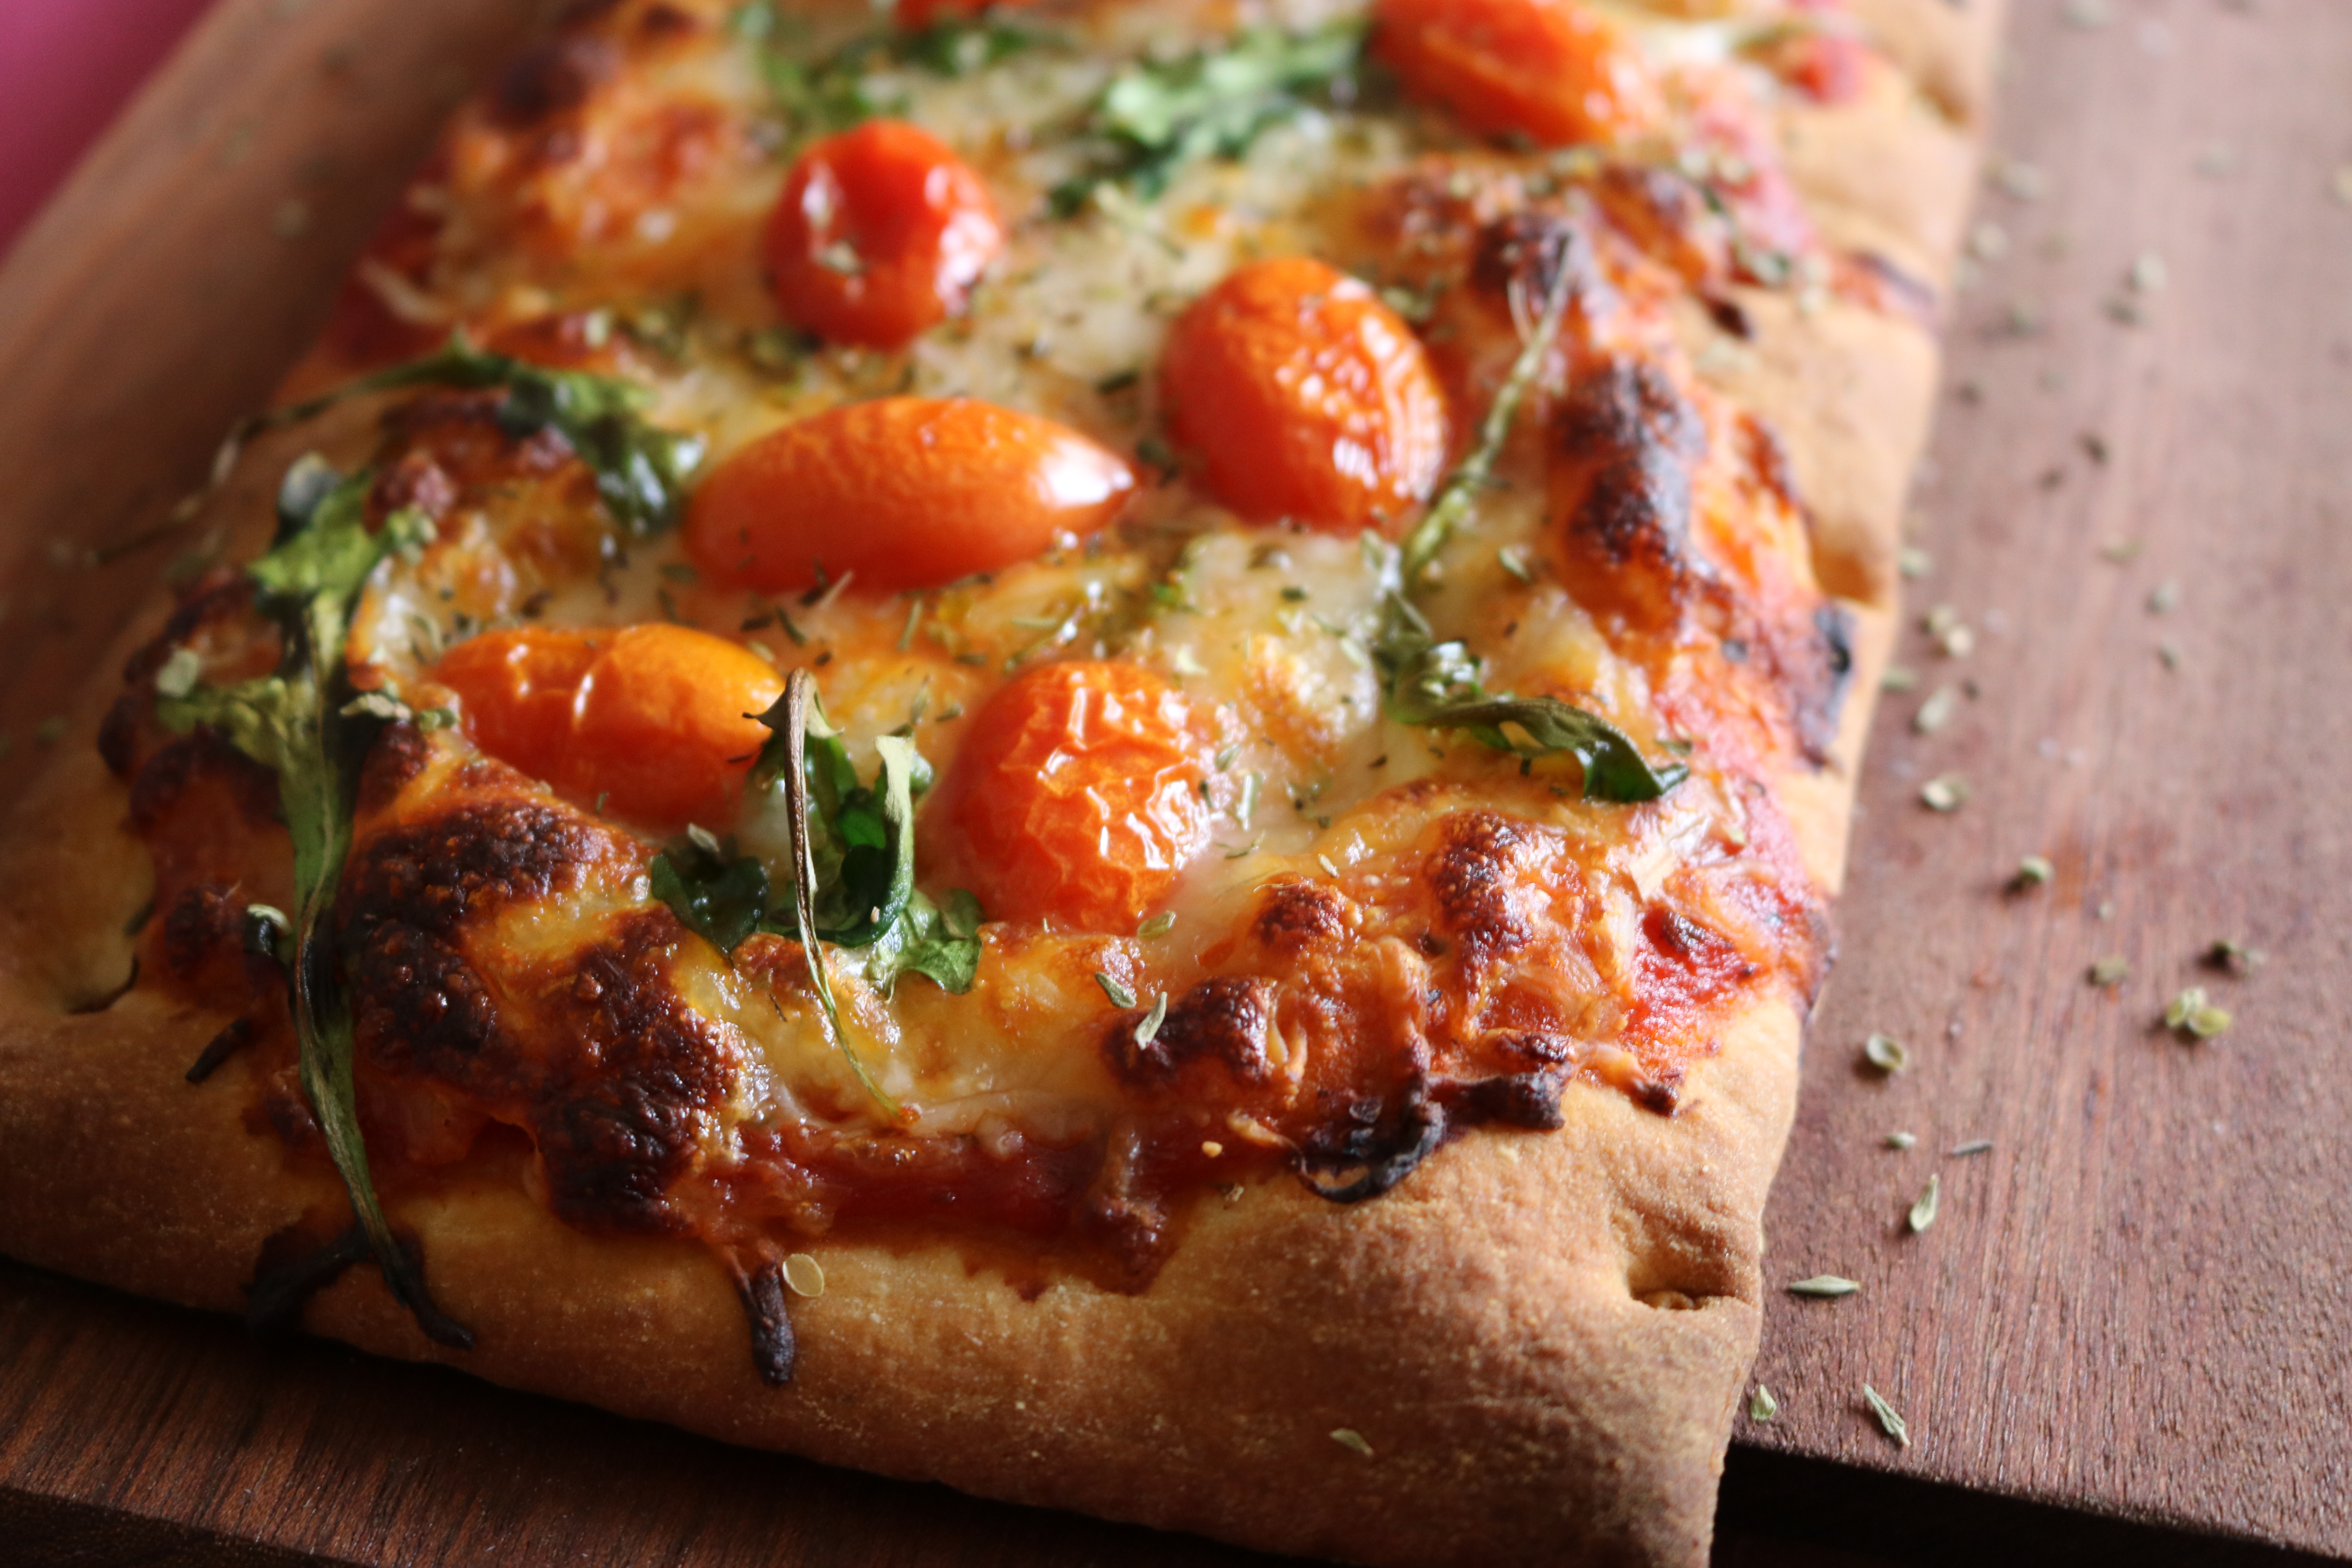 Flatbread pizza topped with tomatoes arugula and Italian spices on a dark wood board